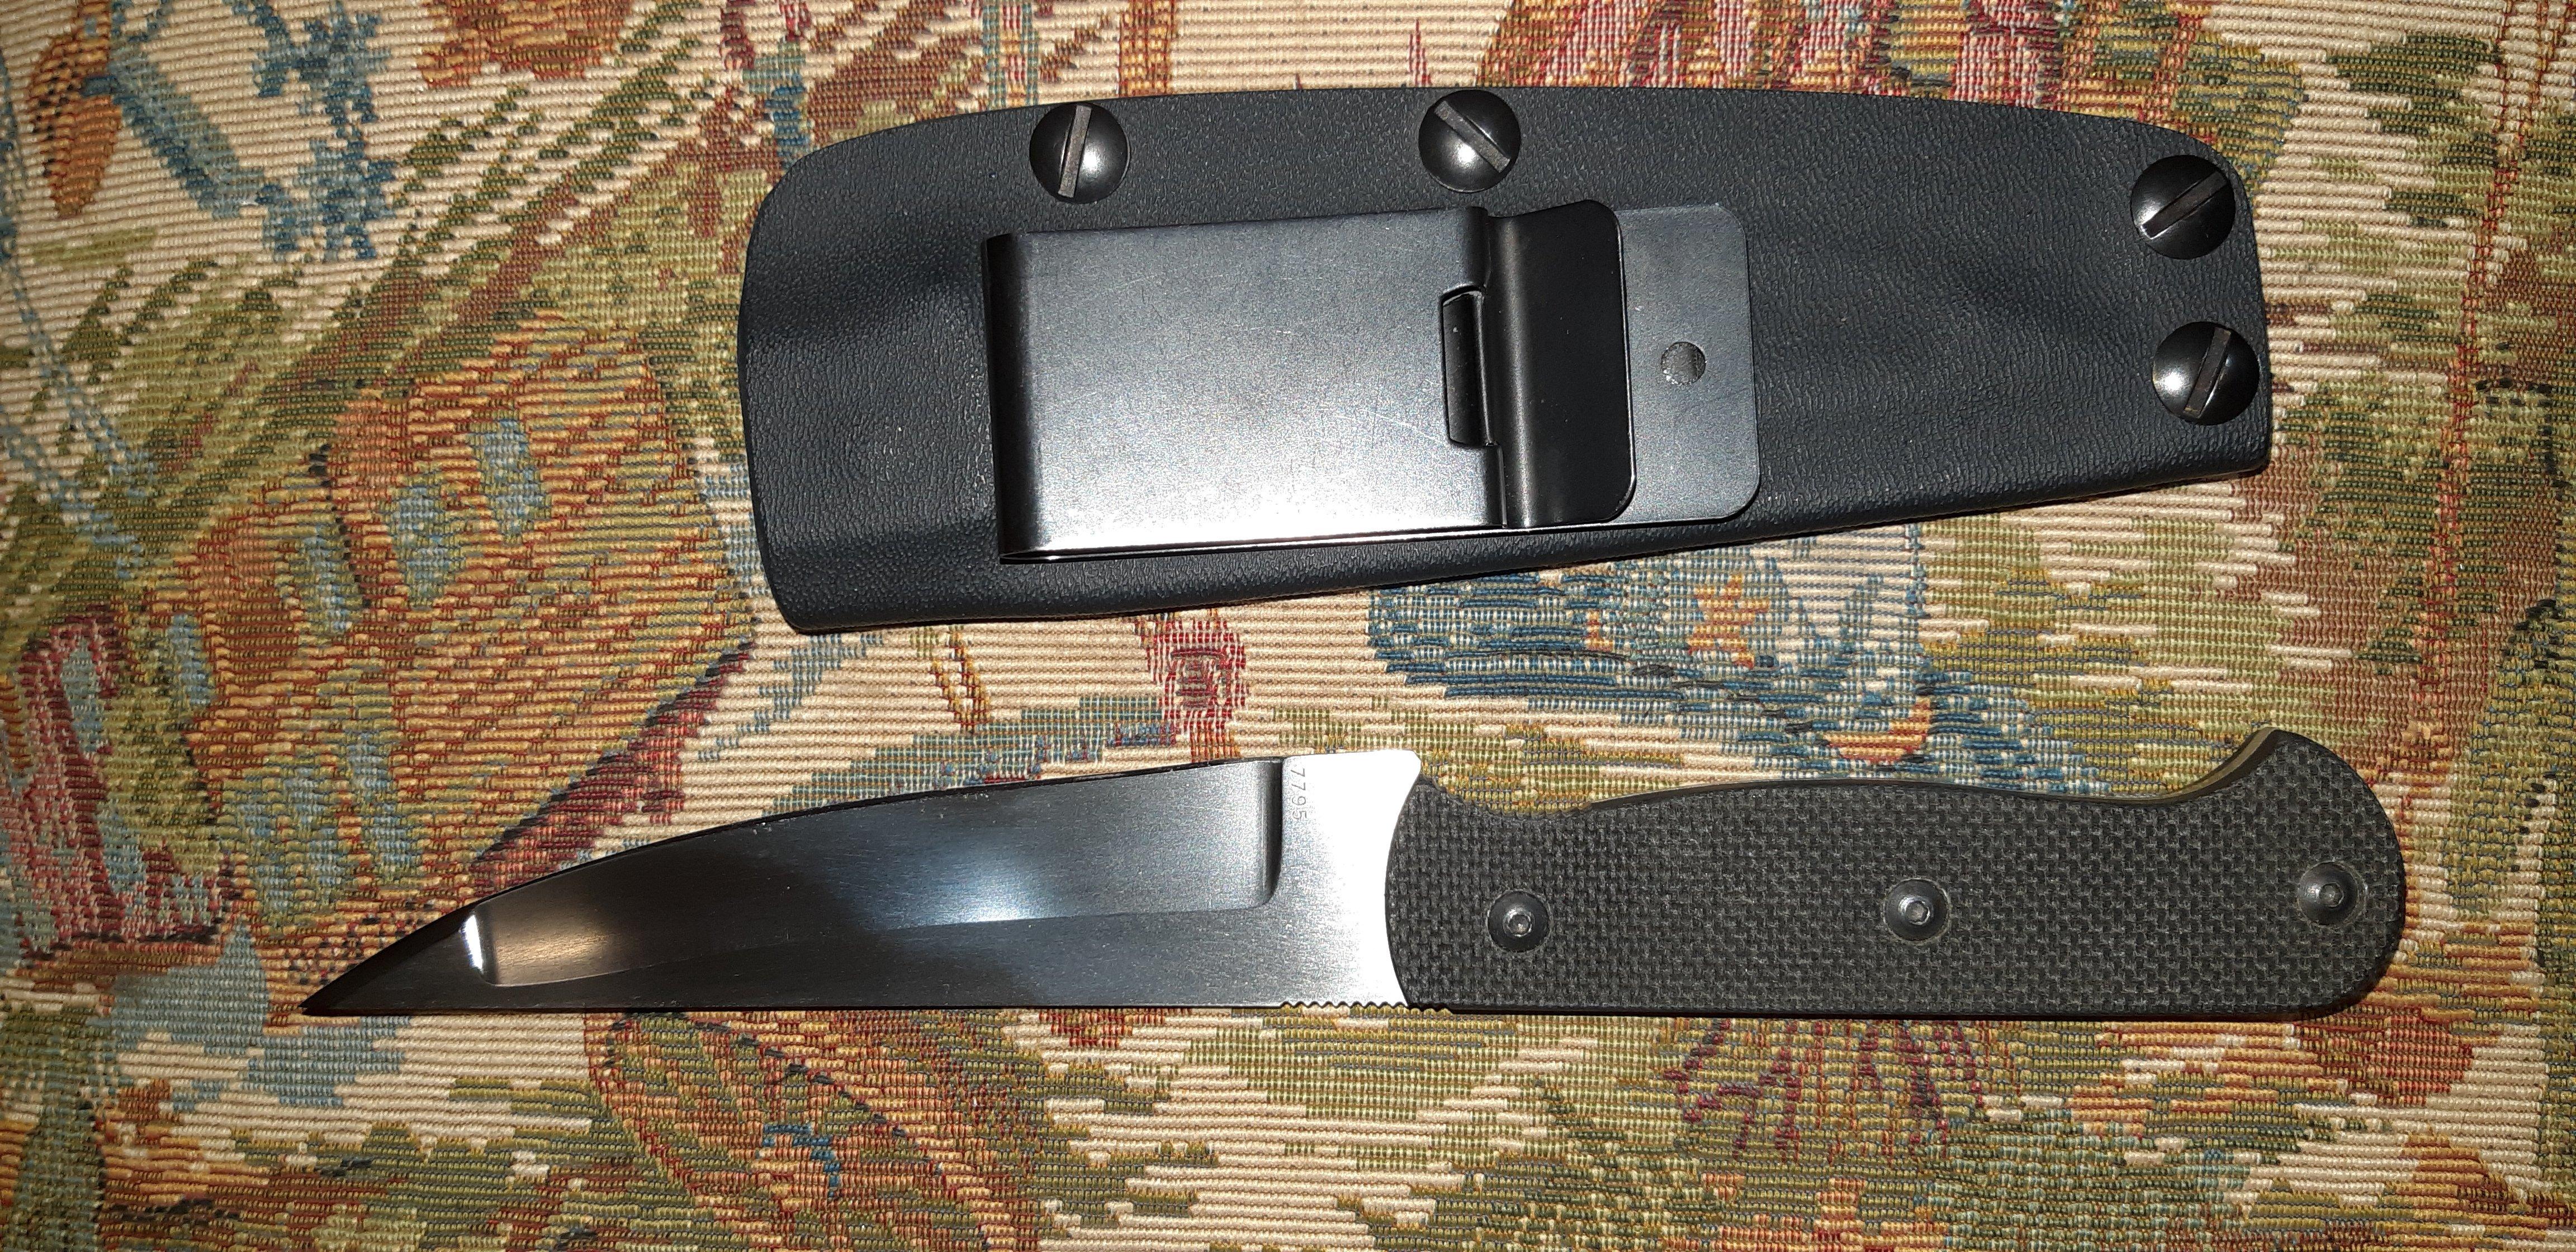 Argali Carbon Knife Review - My Experience in the Field